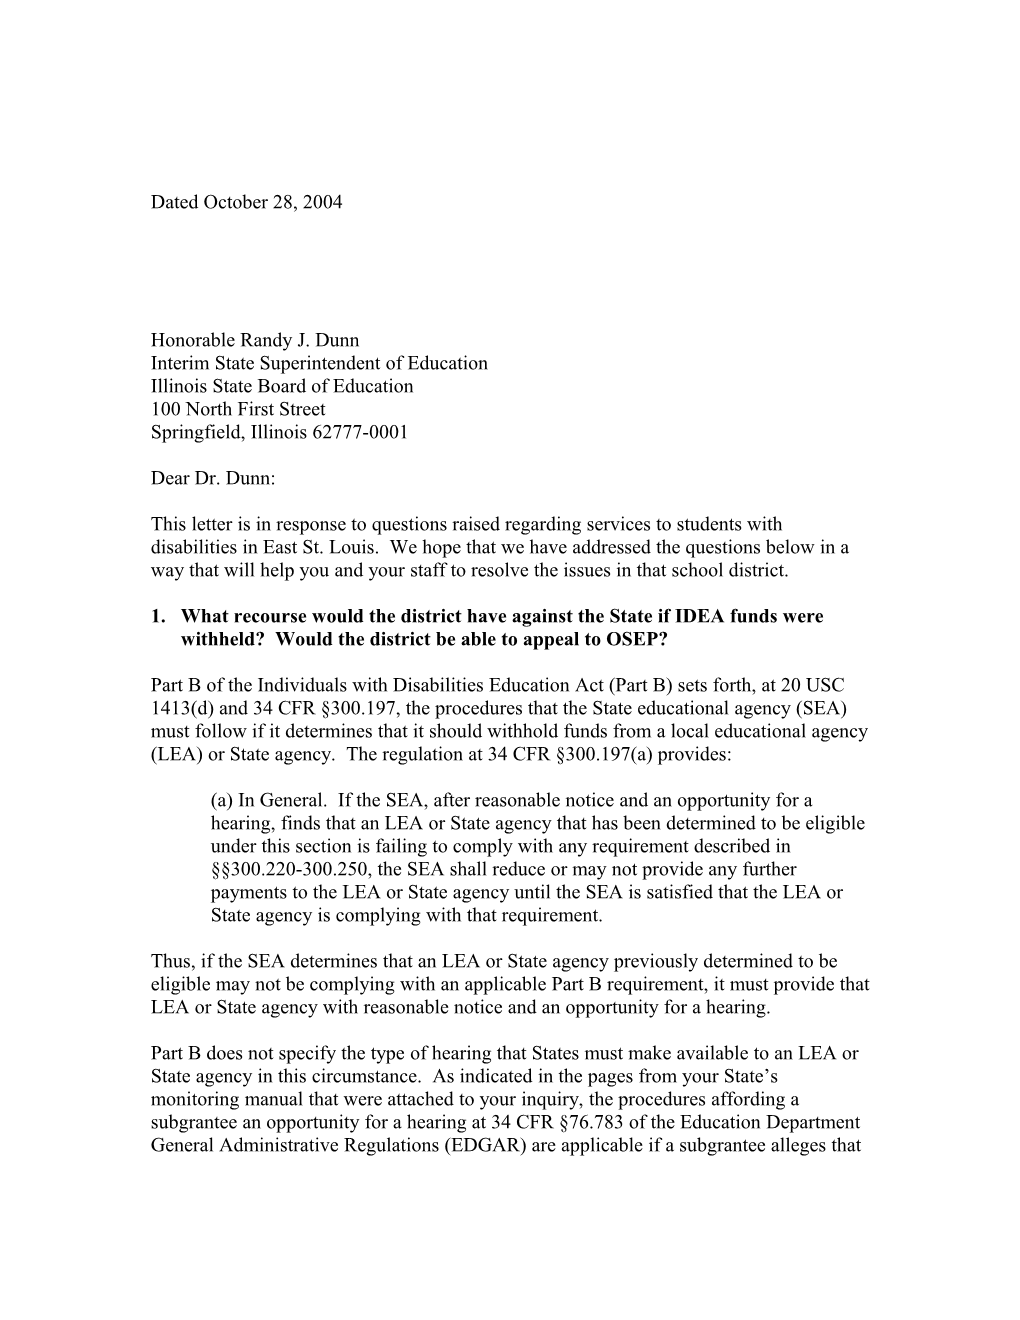 Letter Dated 10/28/04 to Dunn Re: Interpreting IDEA Or the Regulations That Implement IDEA